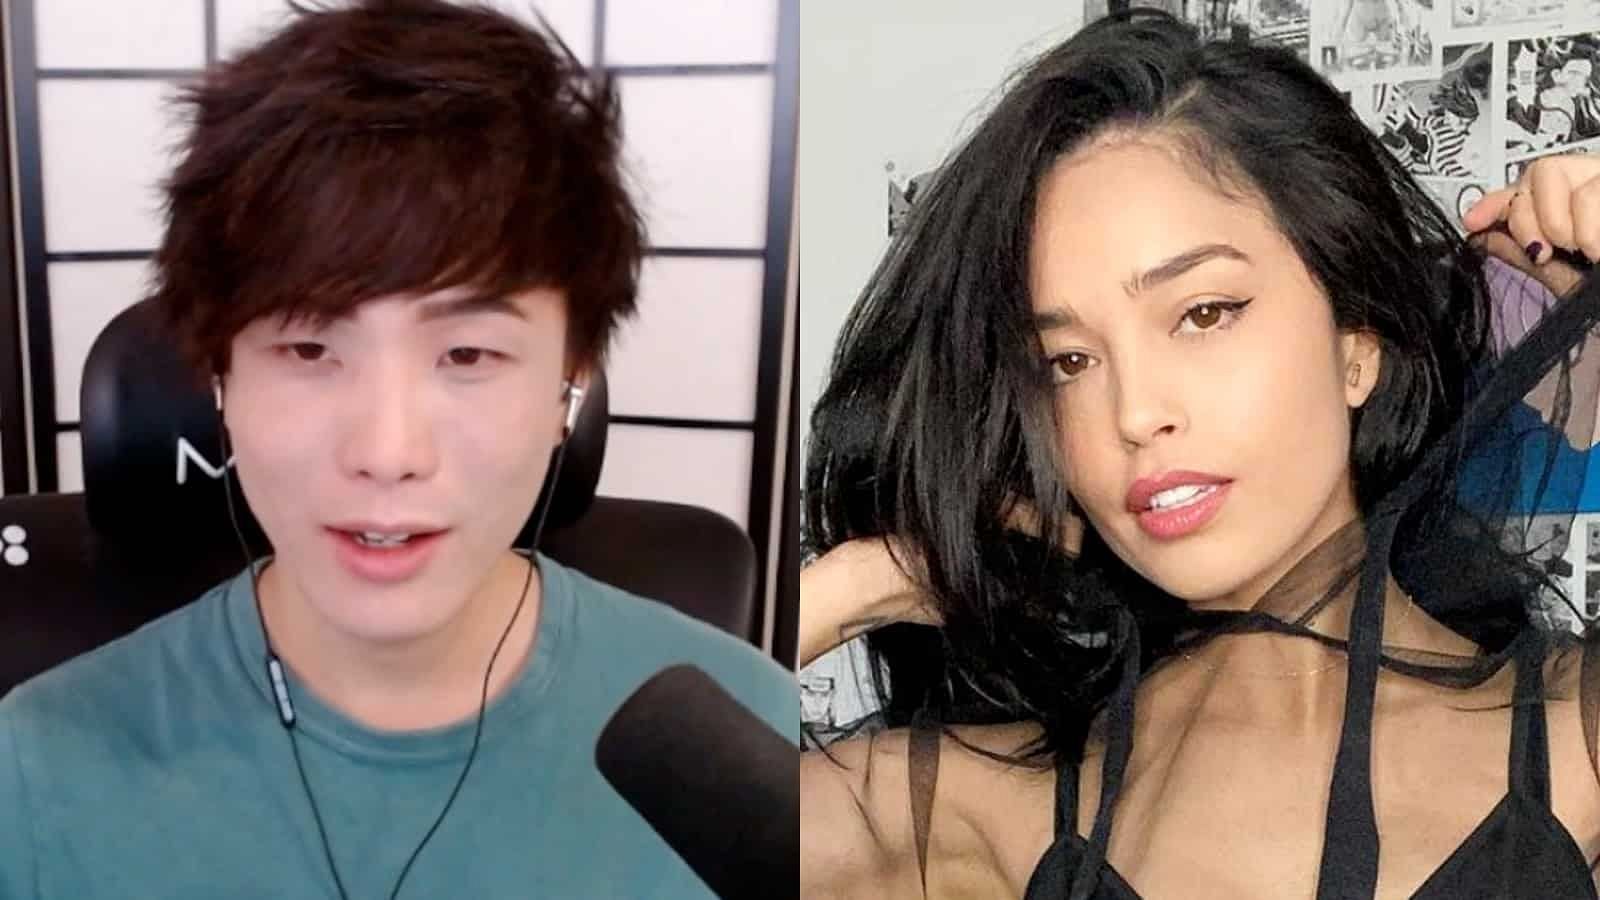 Valkyrae hilariously responds to Sykkuno &quot;indirectly&quot; calling her hot (Image via ginx.tv)